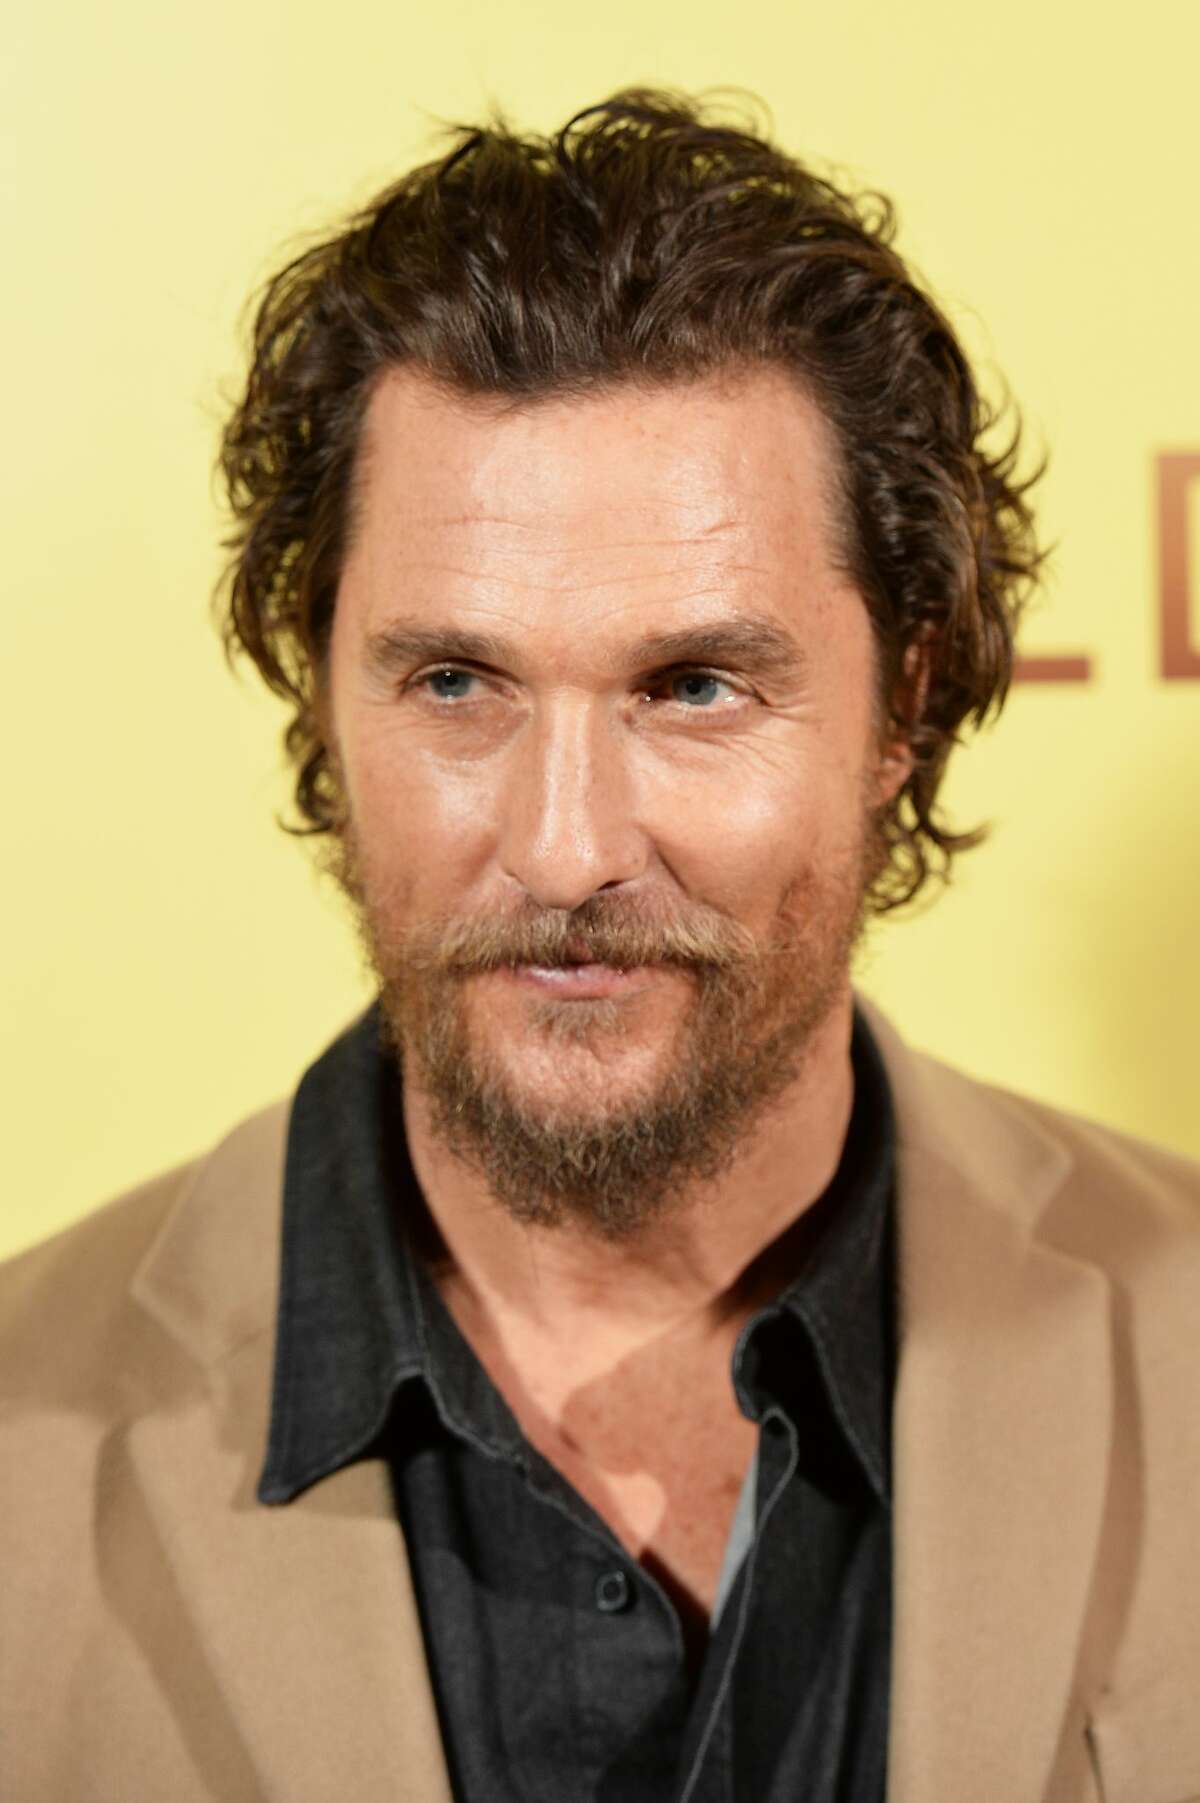 Matthew McConaughey b. 1969 Texas connection: Born in Uvalde, University of Texas grad, lives in Austin Coolness factor: "Alright, alright, alright"